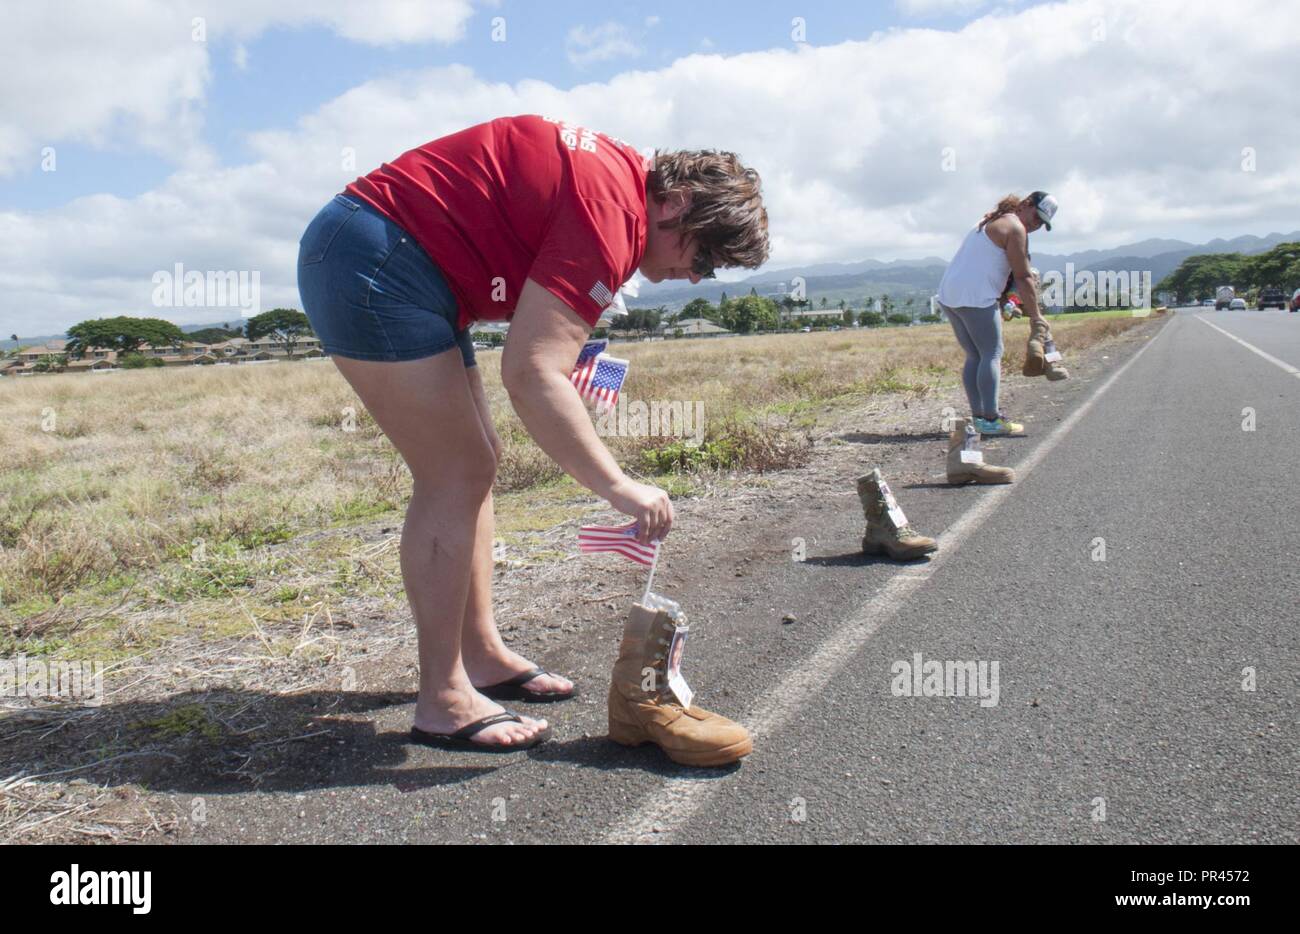 FORD ISLAND — Air Force spouse Kim Andrews (left) places an American flag in each of the many military boots that volunteers like Army spouse Elba Williams (right) have placed along the road at Ford Island, Sept. 6, 2018. The boots, each bearing the name of a fallen service member or military working dog, will line the path for the Fisher House 8K Hero & Remembrance Run, Walk or Roll, scheduled for Saturday, Sept. 8. The boots will be displayed through Sept. 15, 2018, on the corner of O’Kane Blvd. and Enterprise Street. Stock Photo